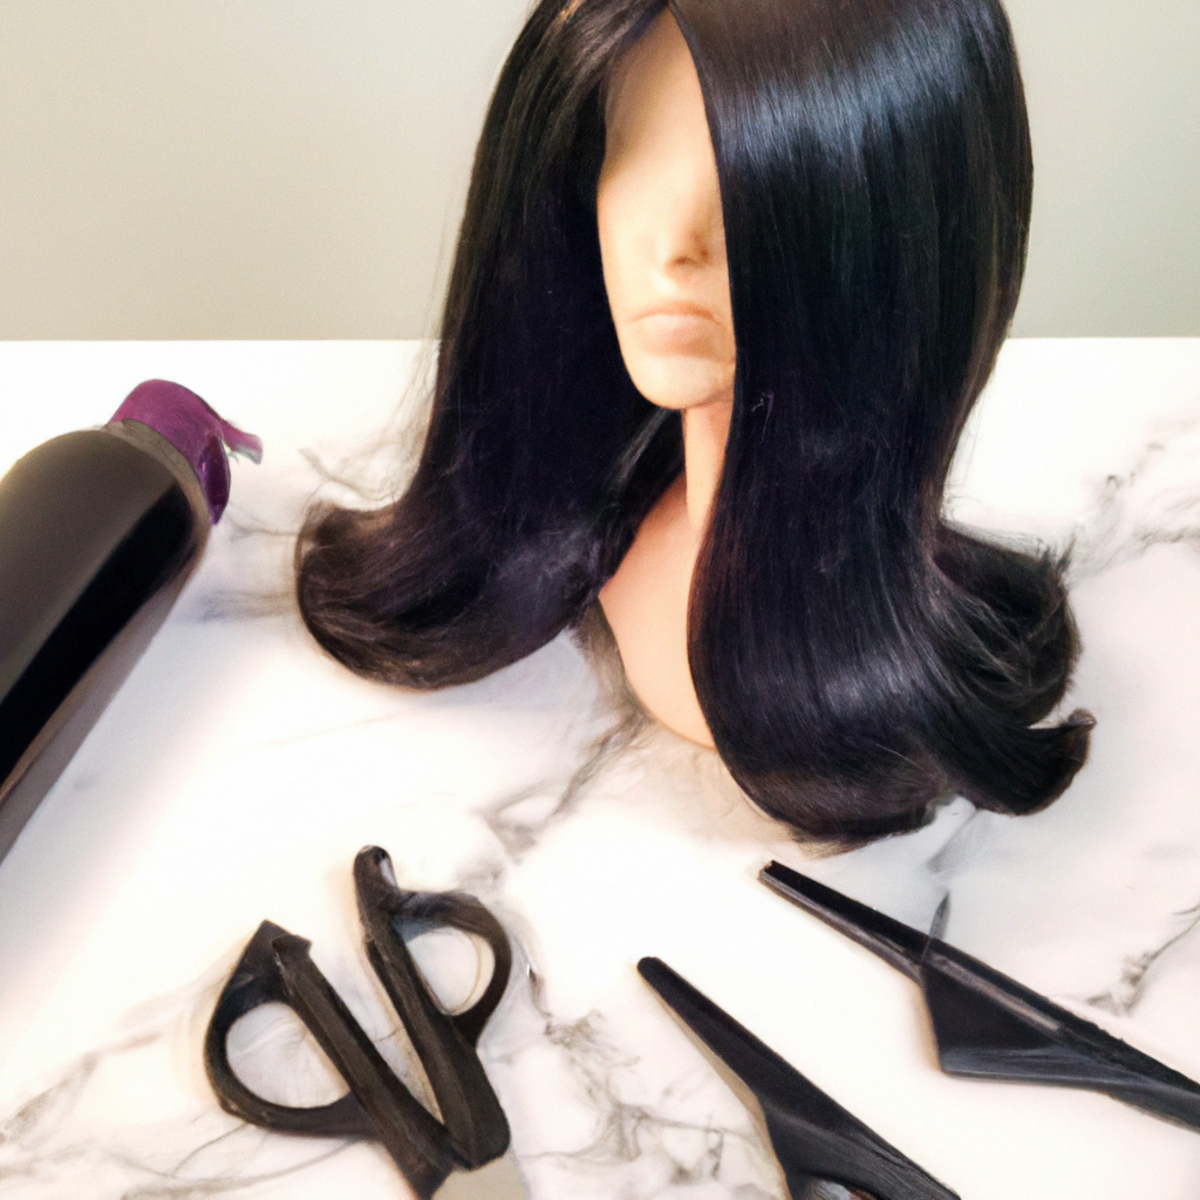 Trending hairstyles for 2023 - Black bob wig and hair styling tools on white marble countertop. Hair serum and hairspray in background. Modern and sophisticated vibe.